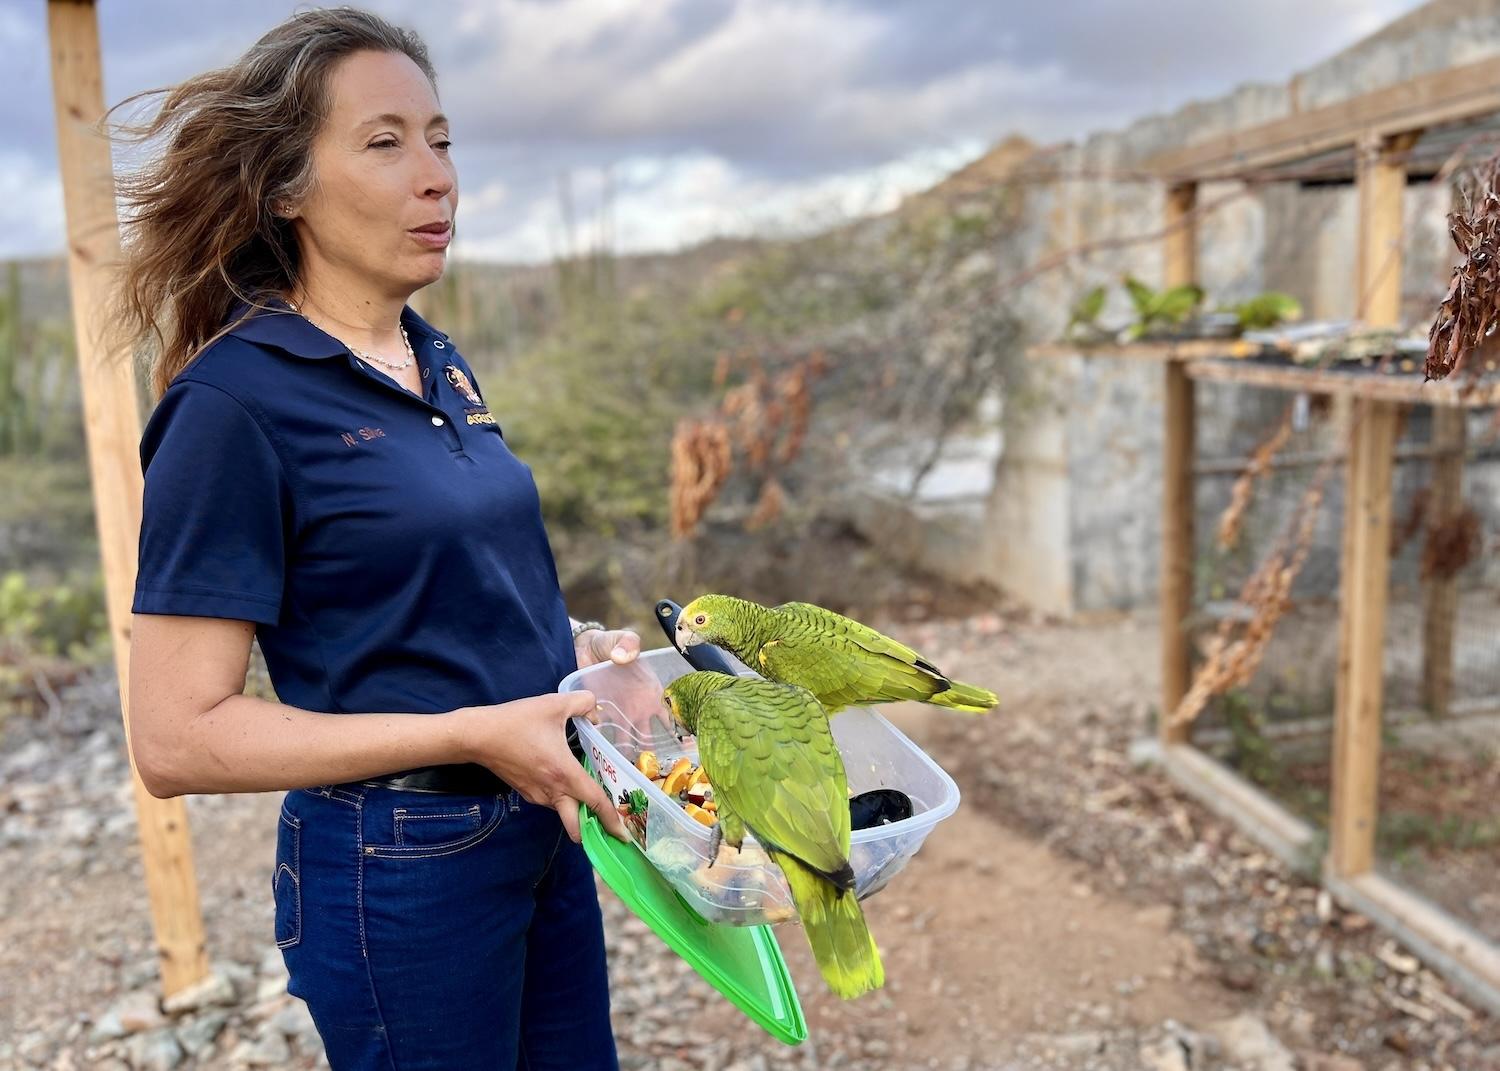 Natasha Silva, the chief conservation officer for the Aruba National Park Foundation, delights in caring for the Loras they rescued from smugglers and reintroduced to the wild.